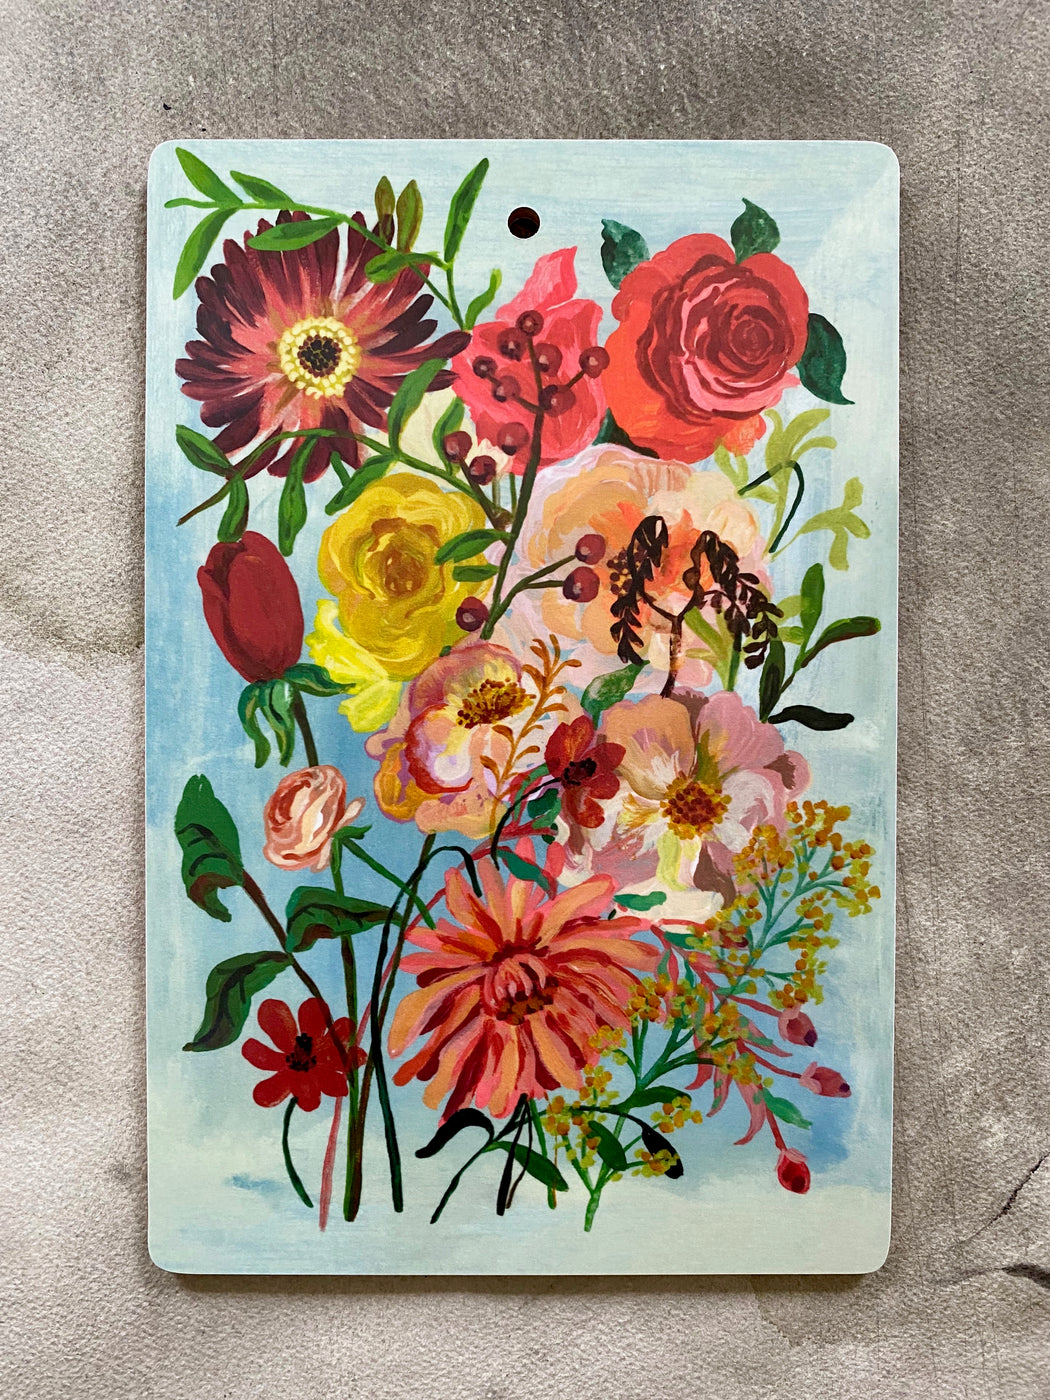 Nathalie Lete "Flowers" Cutting Board